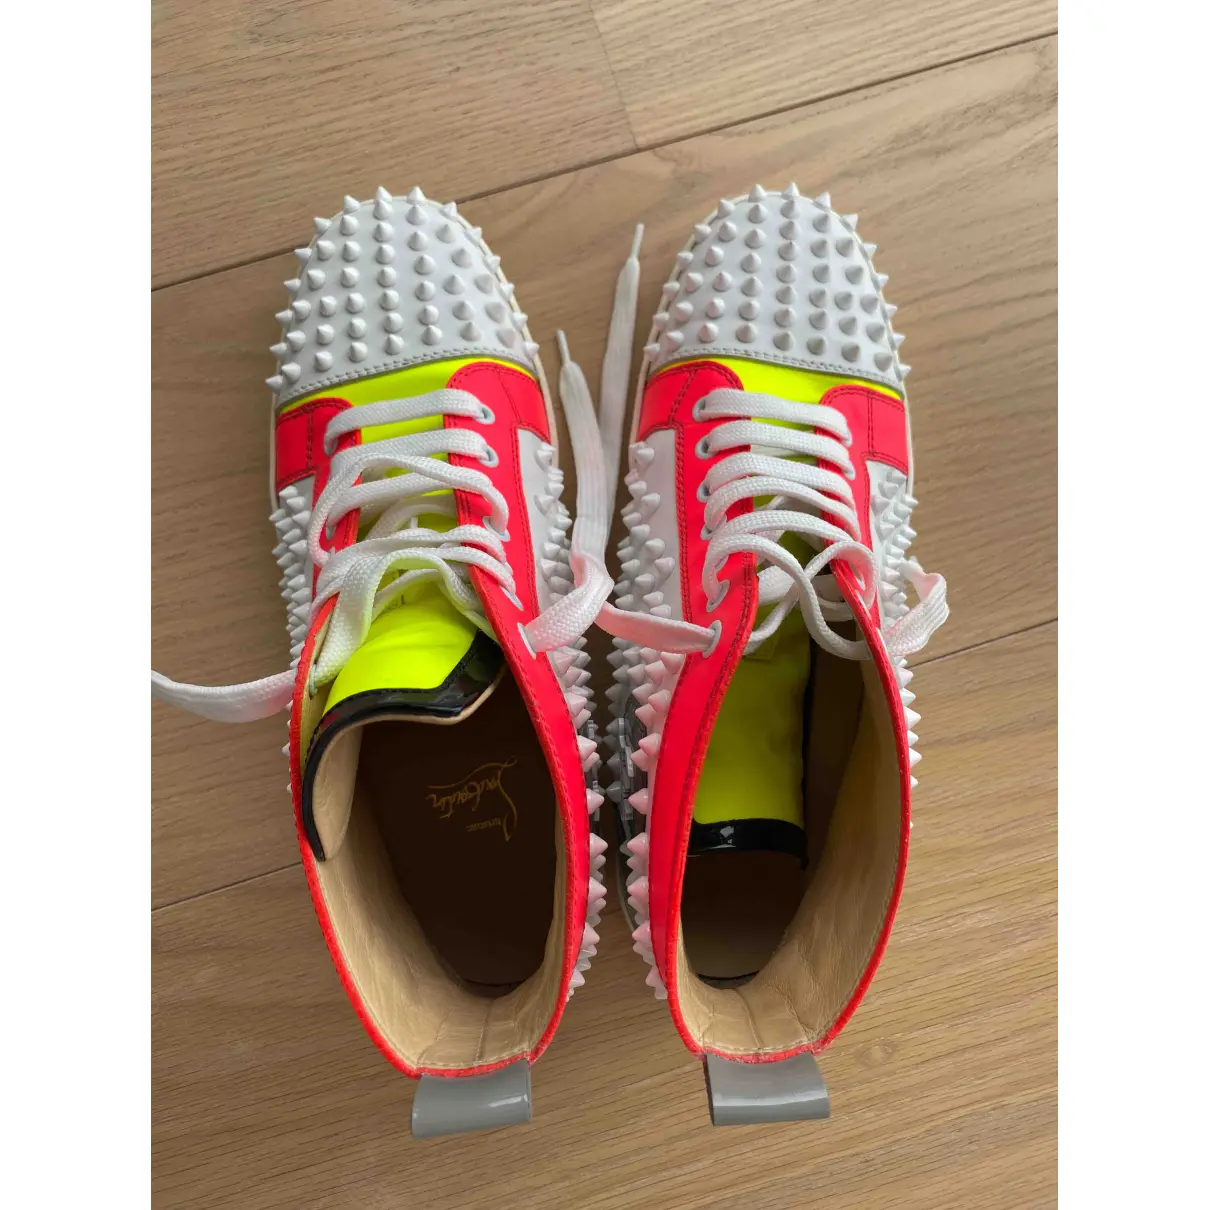 Buy Christian Louboutin Louis leather trainers online